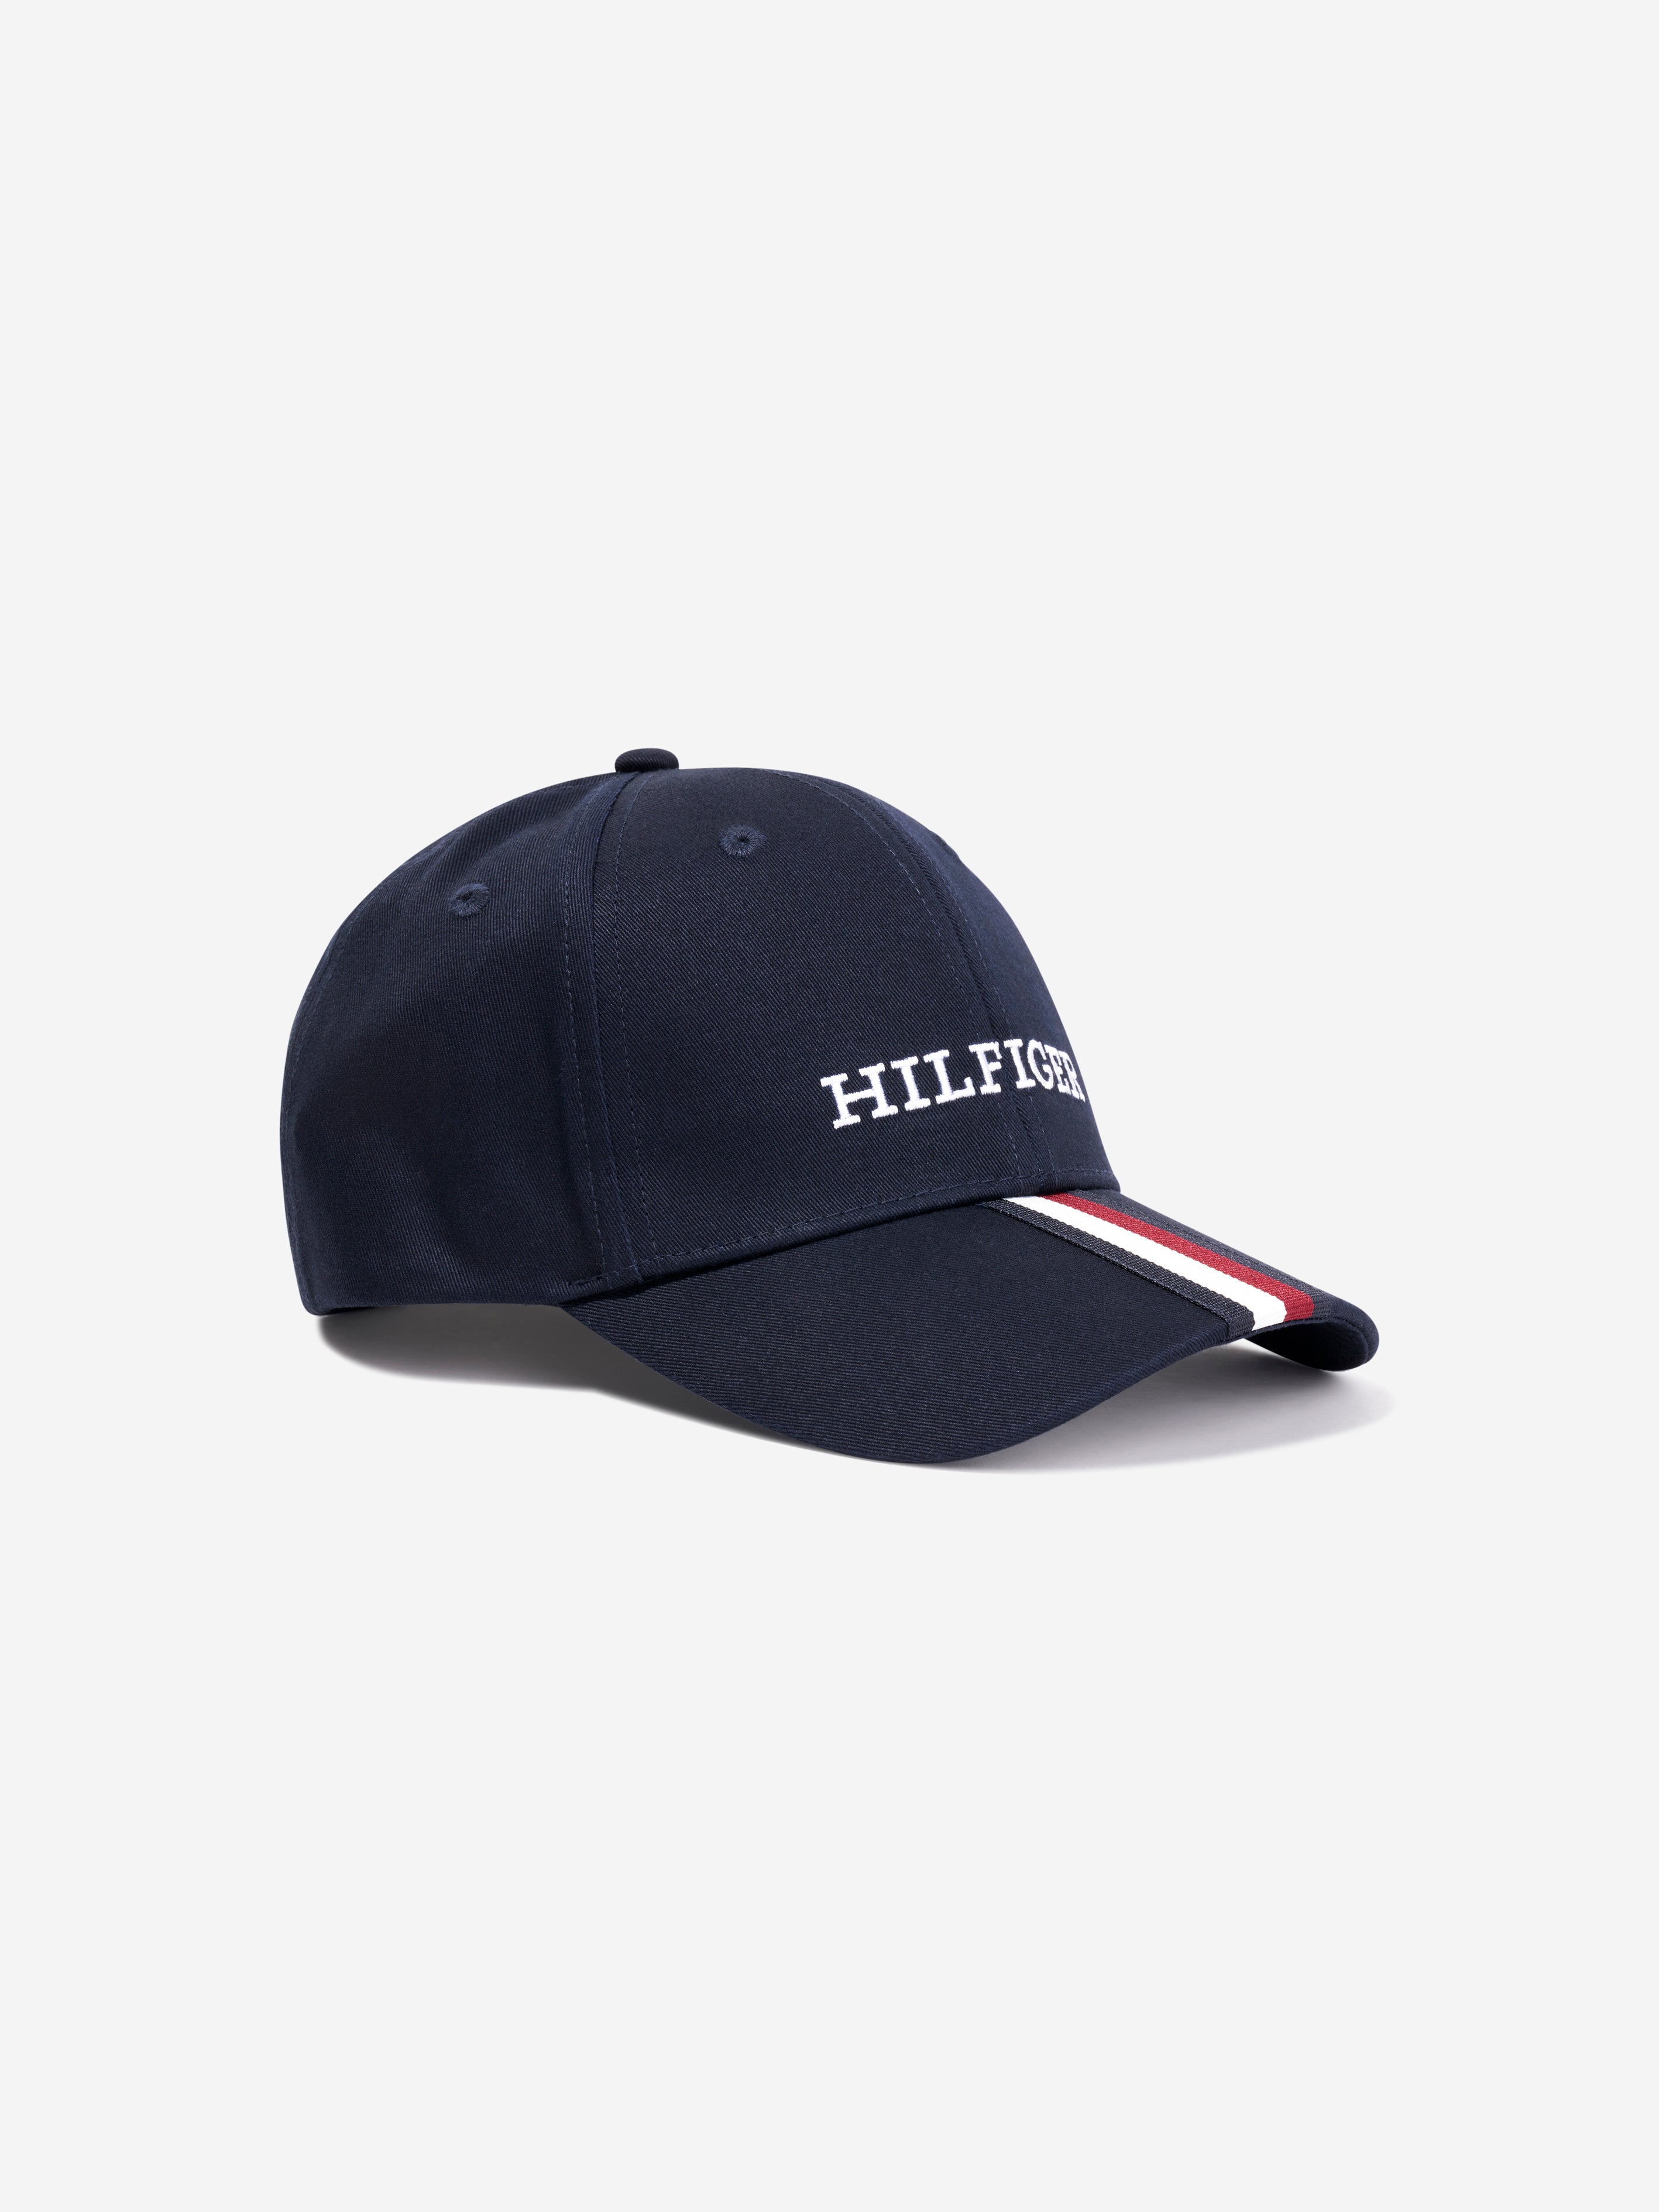 Tommy Hilfiger Kids Cap Corporate | in Navy Childsplay Clothing Hilfiger